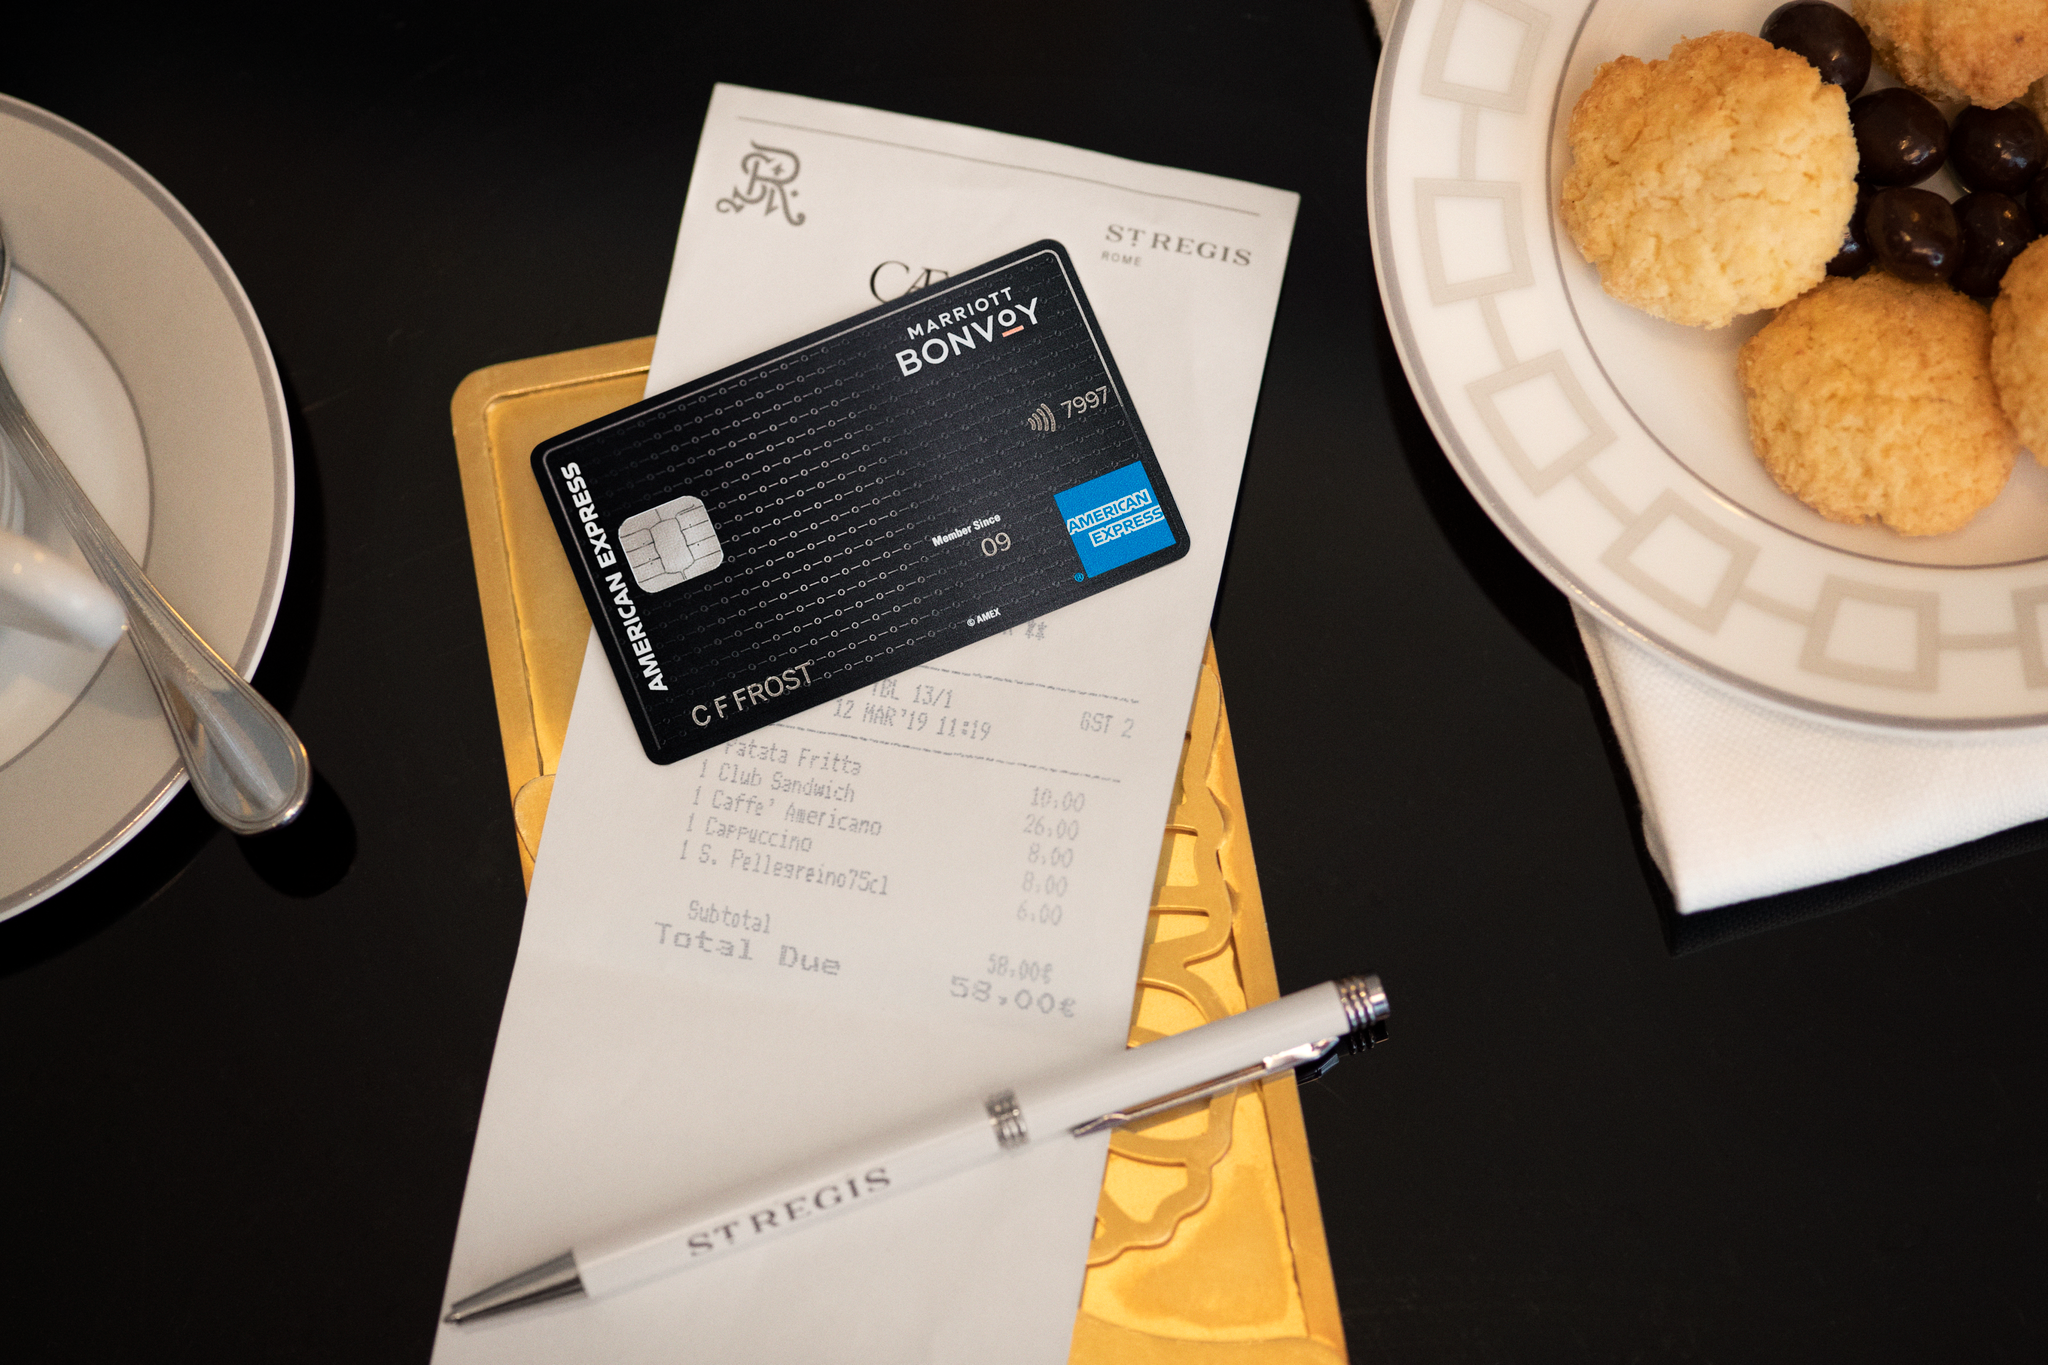 Limited Time Offers for Marriott Bonvoy cards